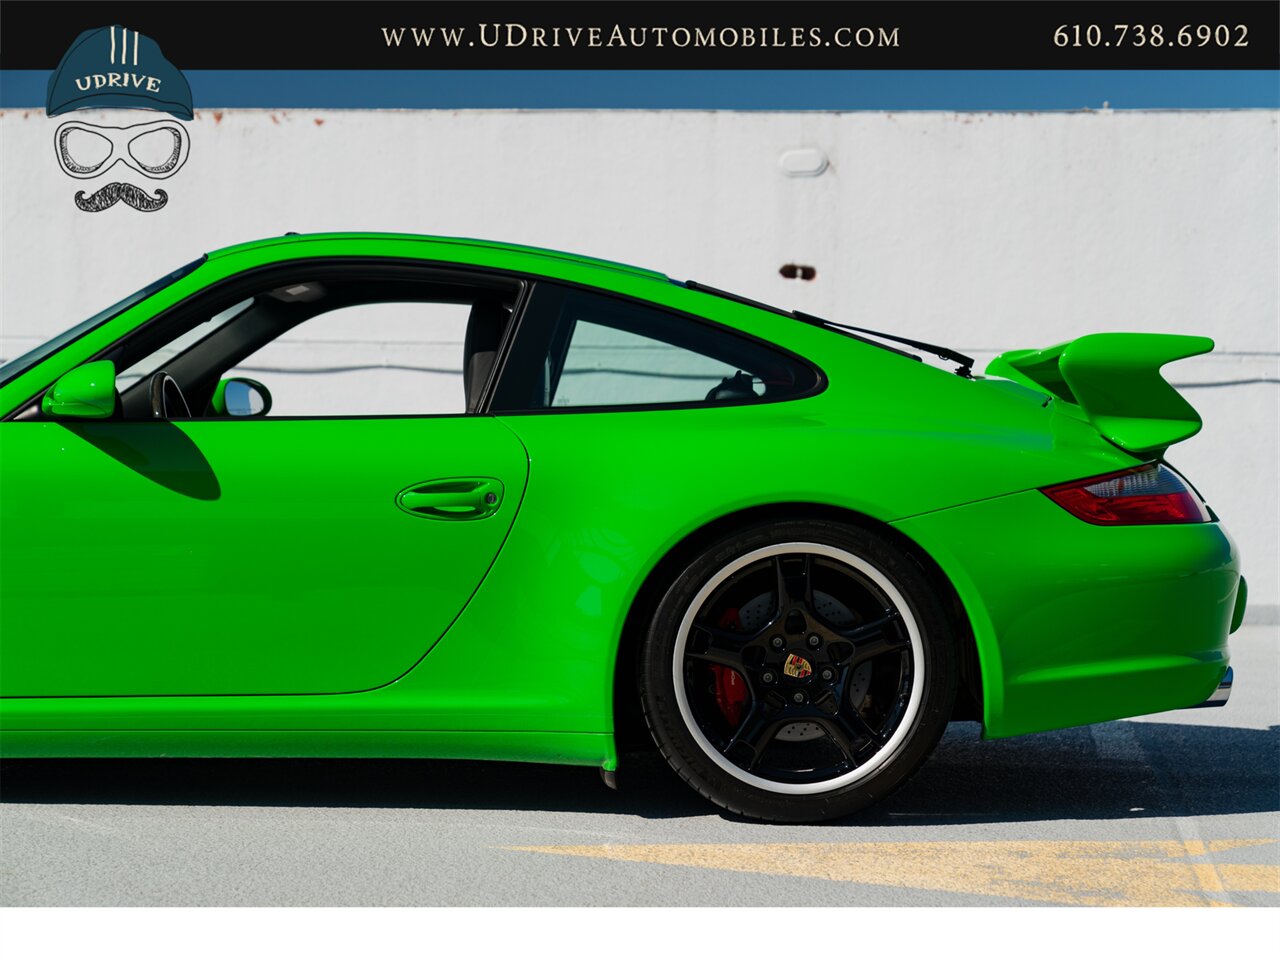 2006 Porsche 911 Carrera 4S  997 PTS Signal Green 6Sp Sport Sts Spt Chrono Spt Exhst - Photo 27 - West Chester, PA 19382